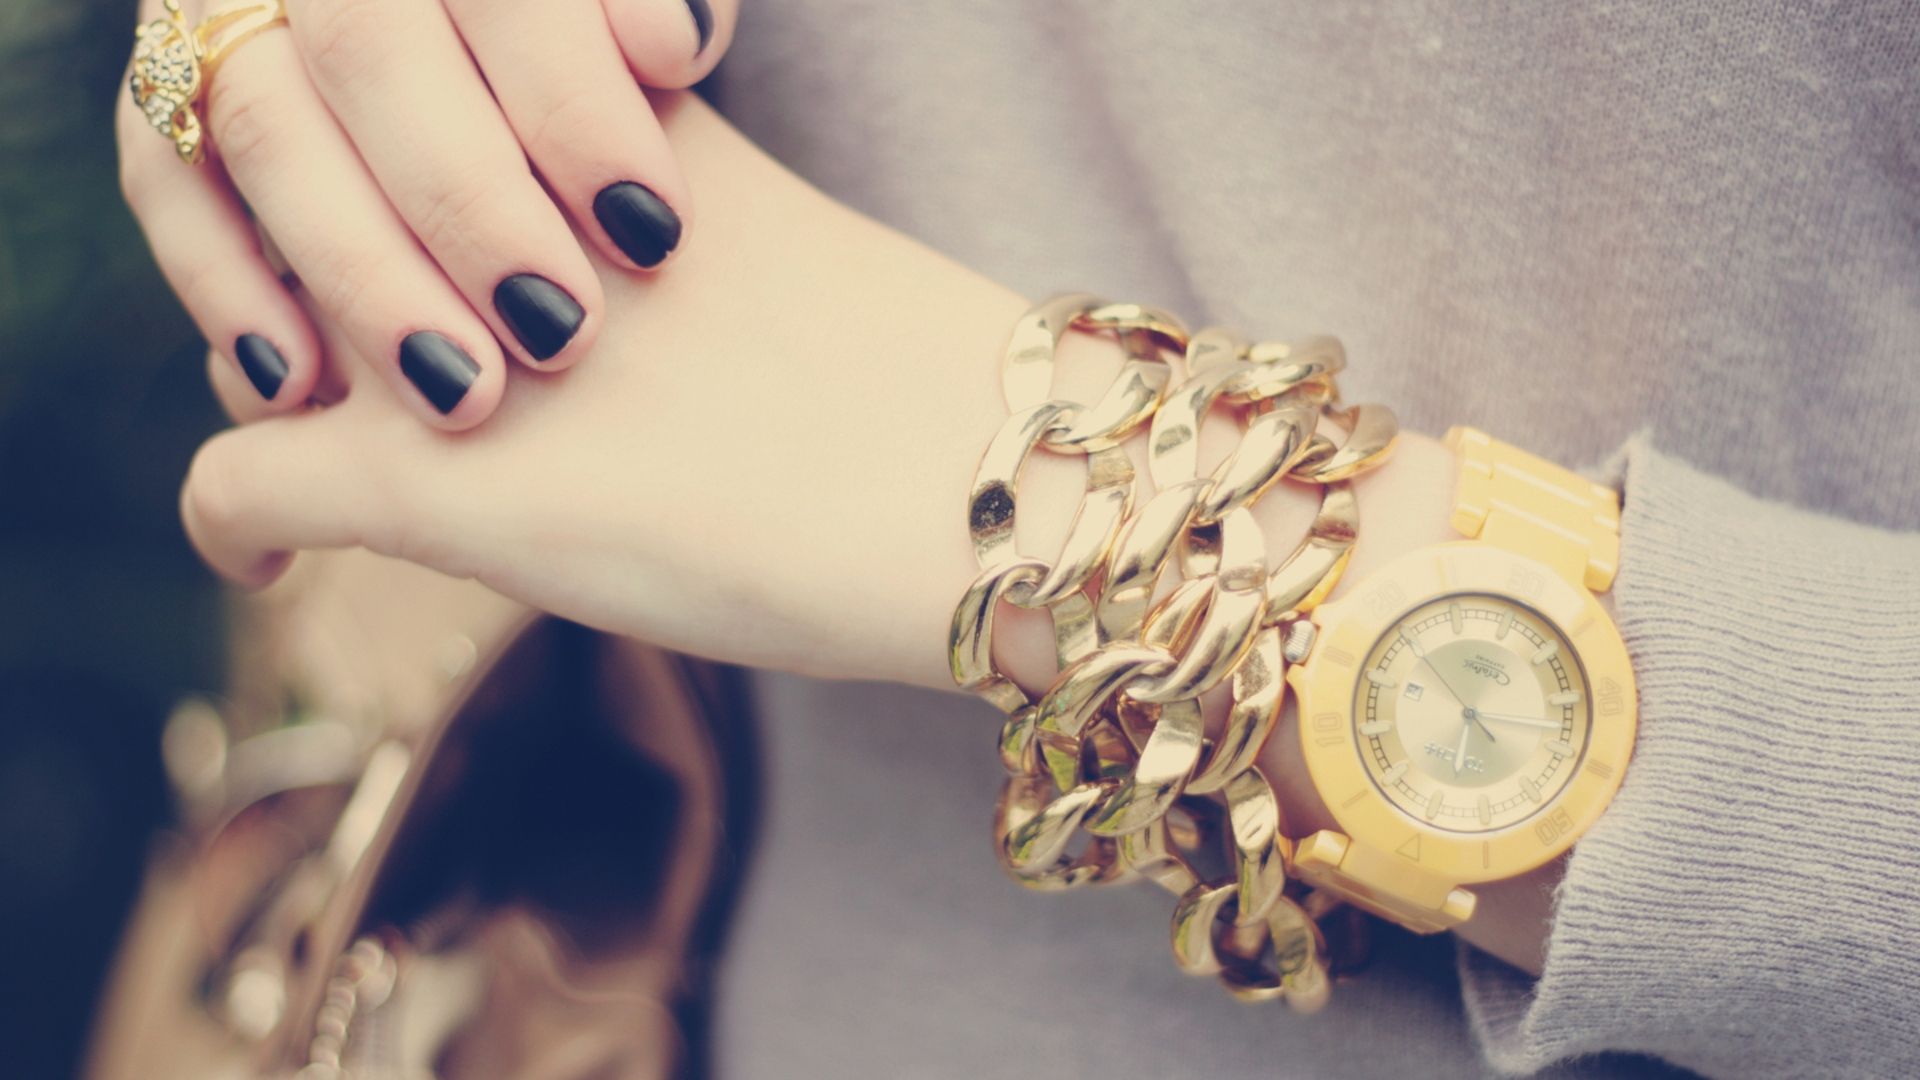 Wallpaper Hands, Watches, Jewelry, Manicure, Girl Watch Girl Image Download